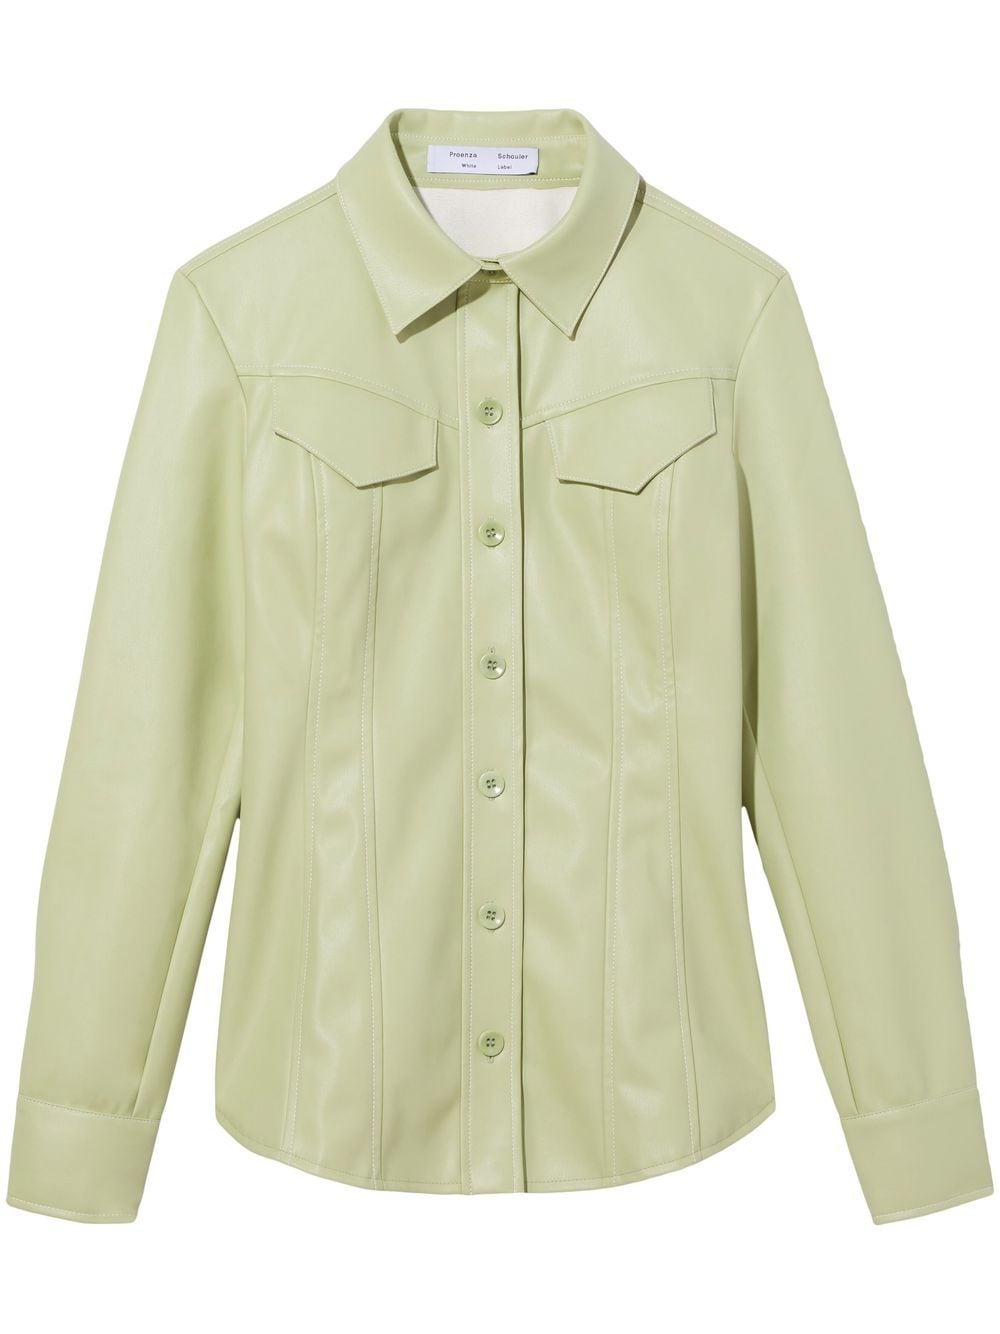 Proenza Schouler White Label Long-sleeved Tapered Shirt In Green